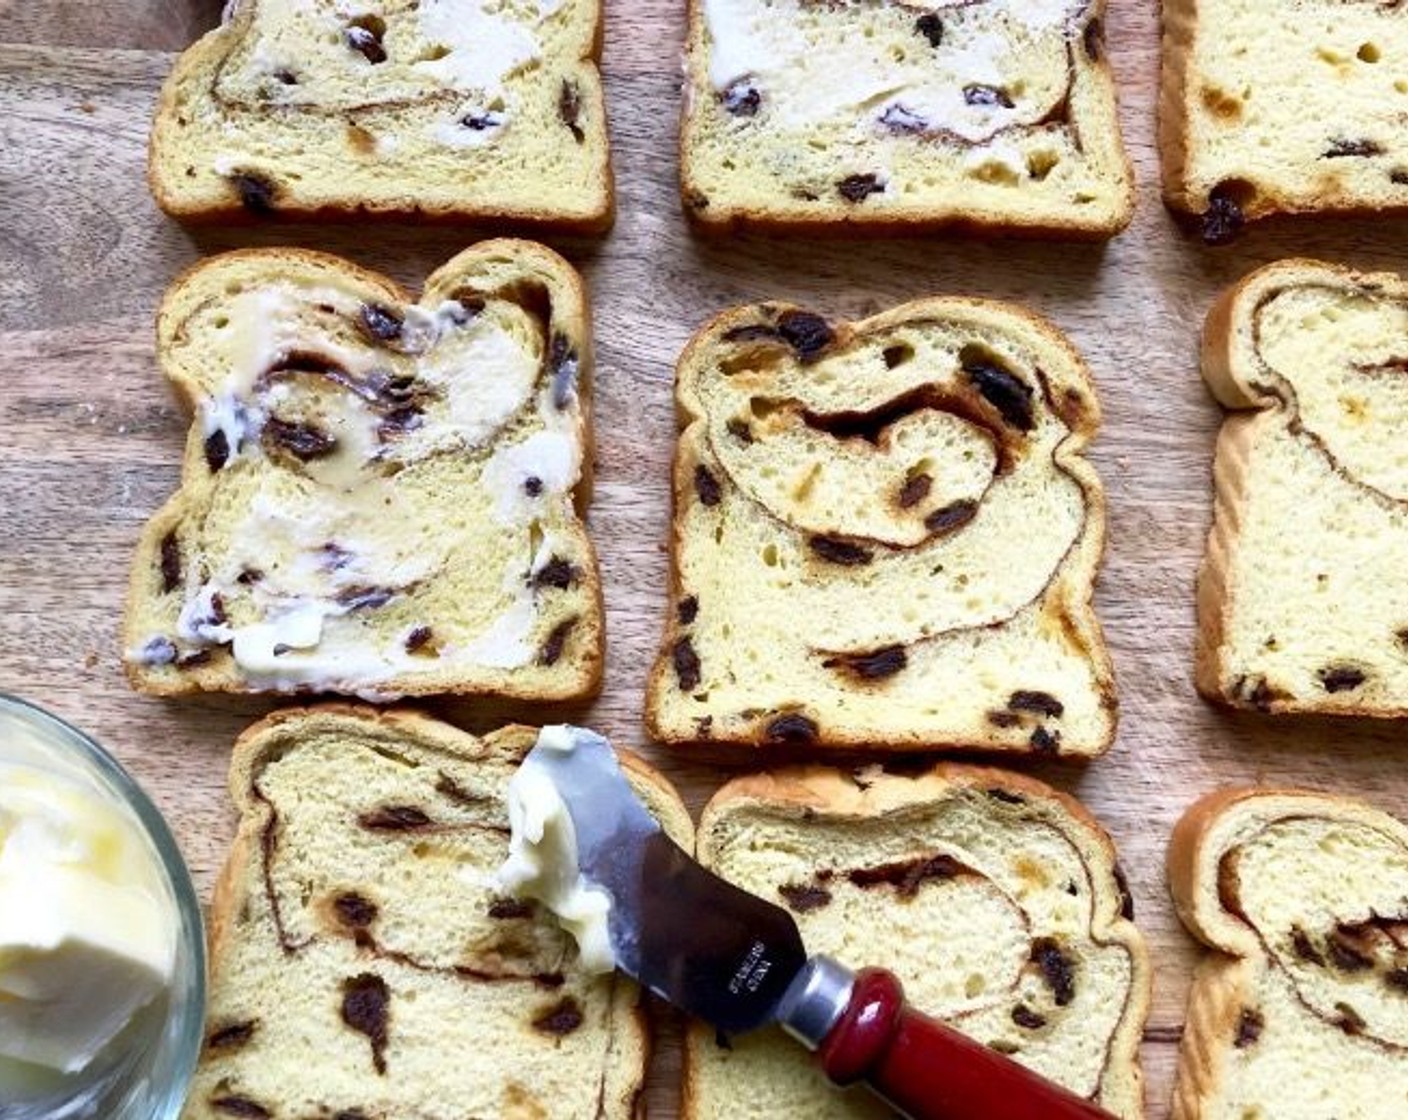 step 2 Spread half of the Cinnamon Raisin Bread (12 slices) with 1 teaspoon of Unsalted Butter (1/4 cup) each.